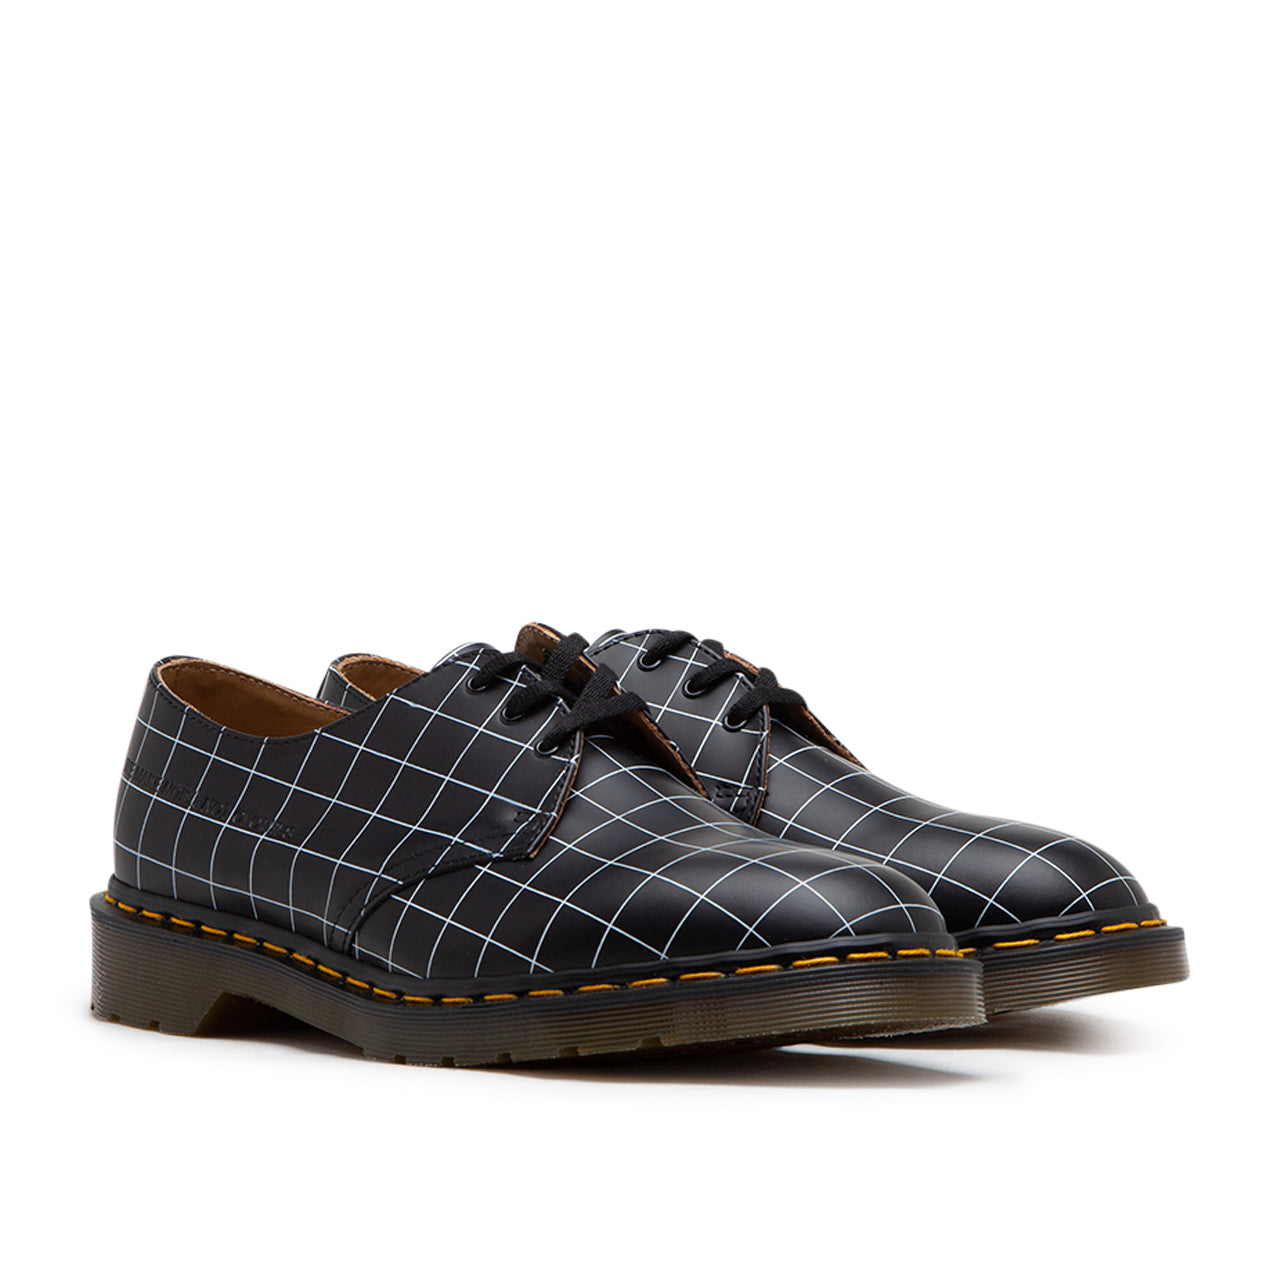 Dr. Martens x Undercover 1461 Check Smooth (Schwarz)  - Allike Store